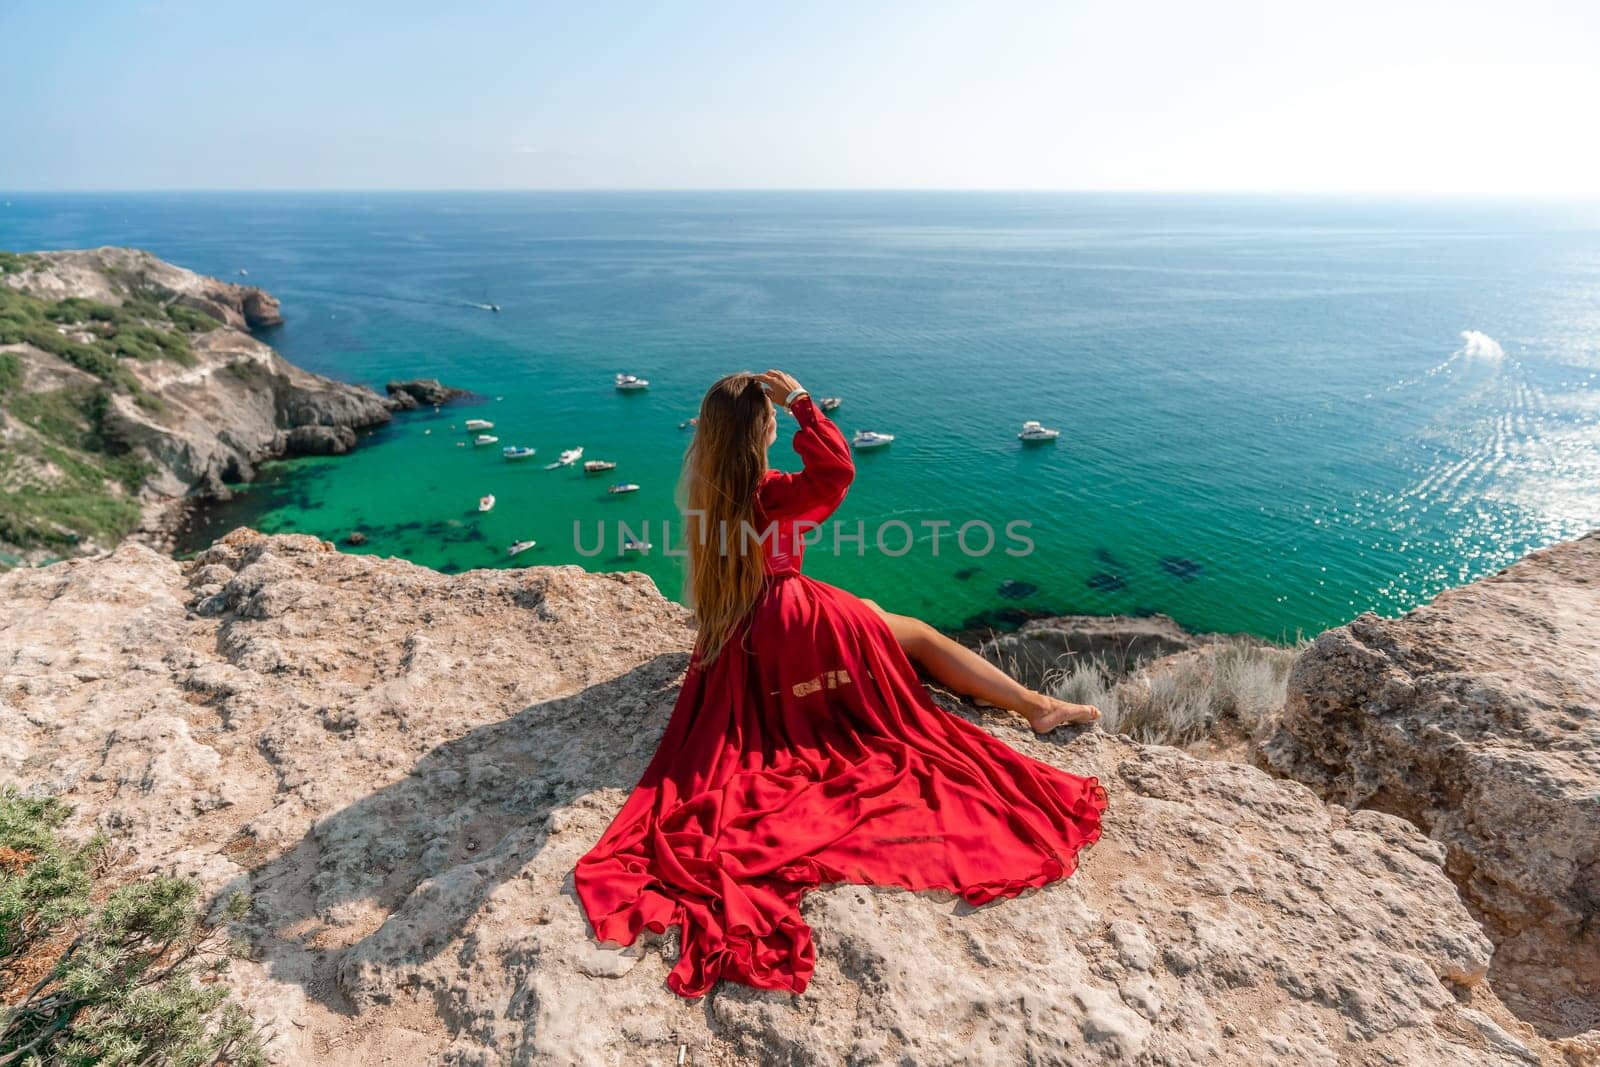 Woman red dress sea. Happy woman in a red dress and white bikini sitting on a rocky outcrop, gazing out at the sea with boats and yachts in the background. by Matiunina